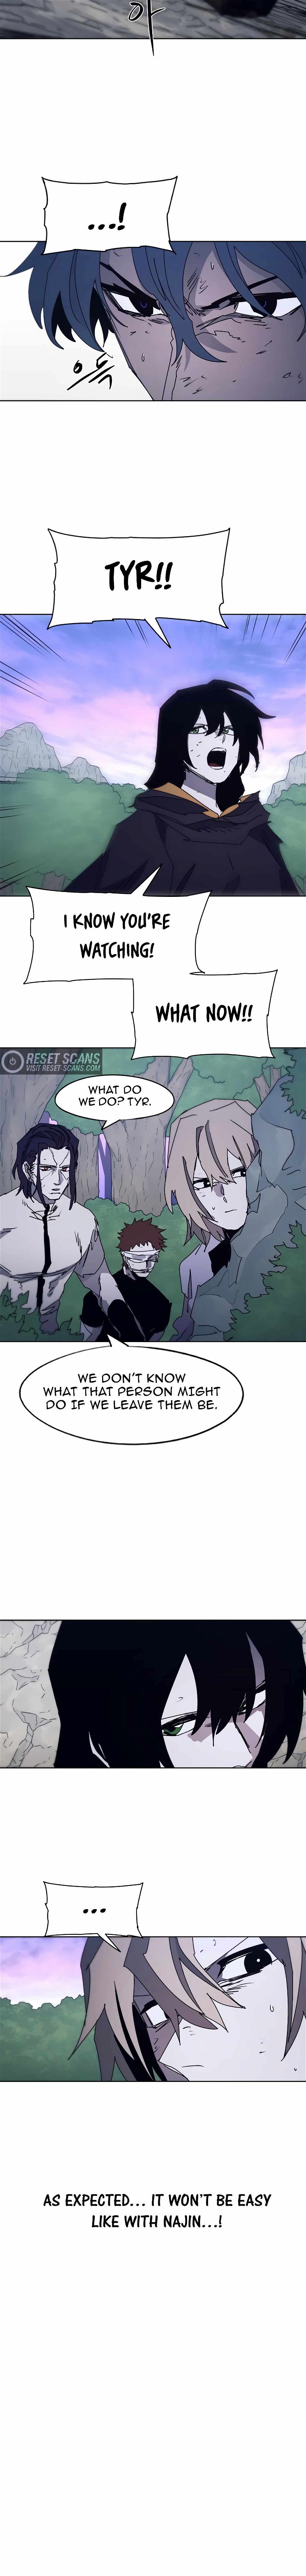 The Knight of Embers Chapter 97 page 2